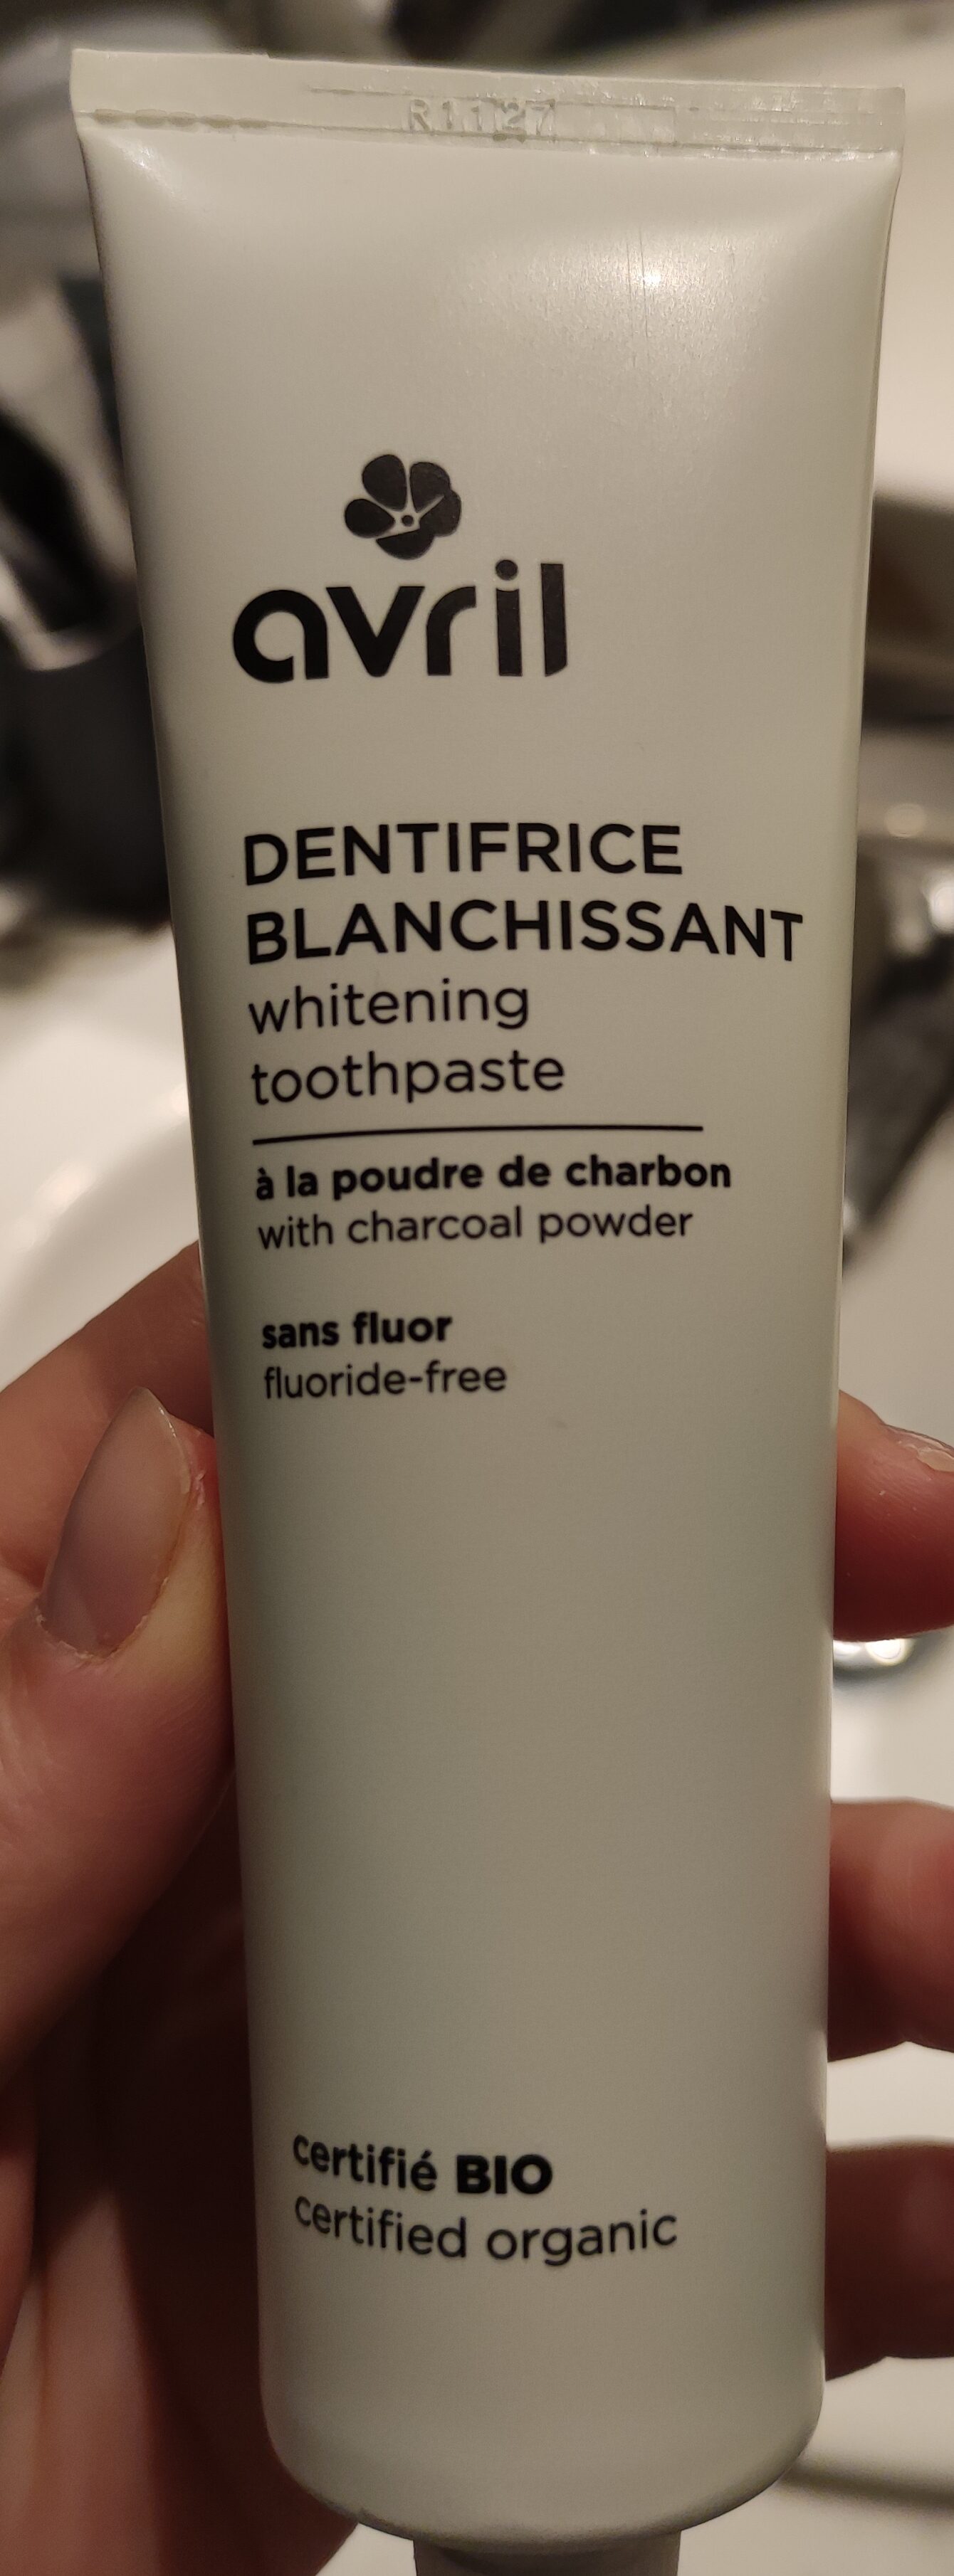 Avril dentifrice blanchissant - Product - fr